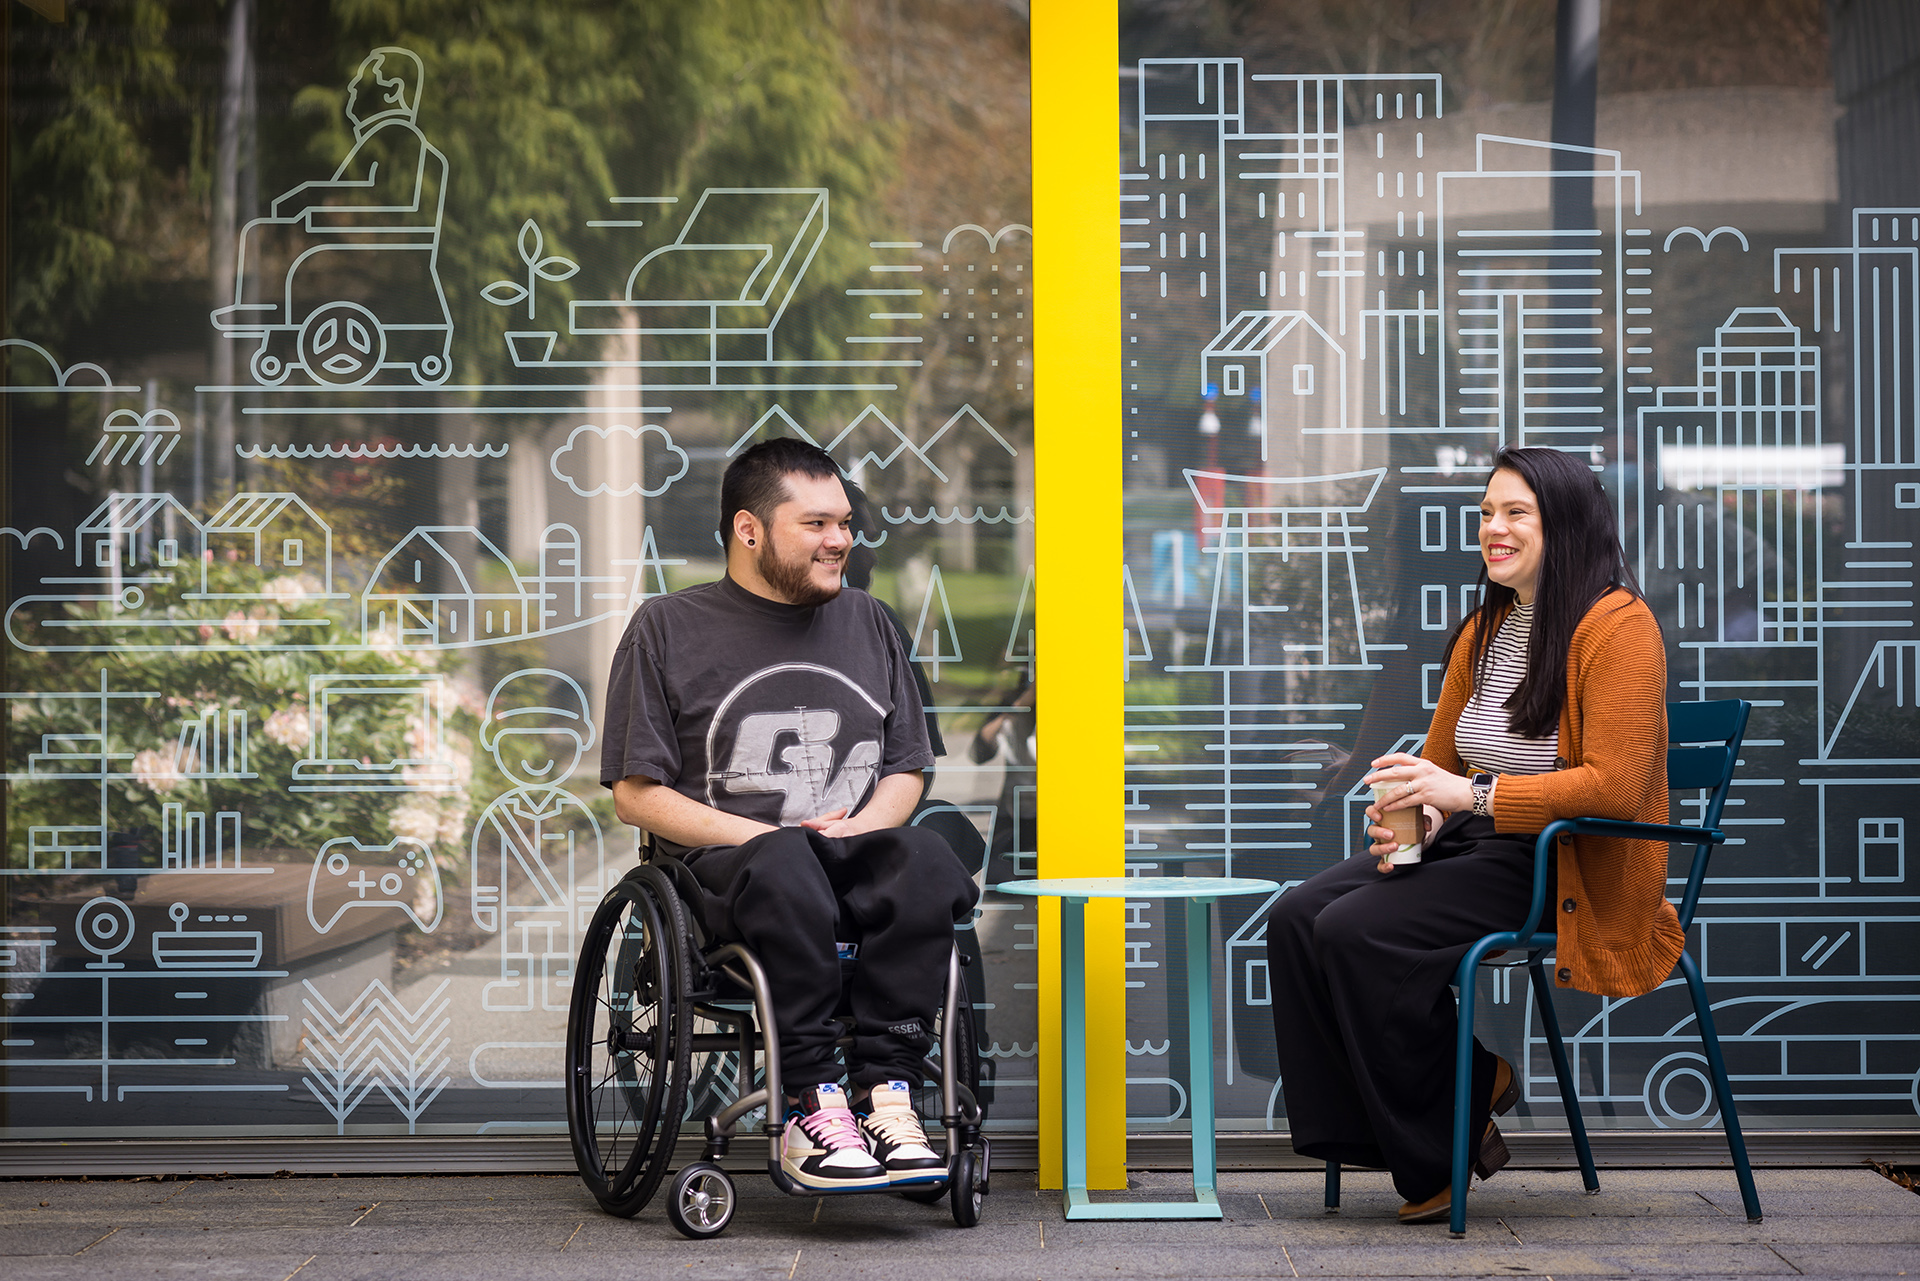 Microsoft’s commitment to accessibility: Creating products and services with people with disabilities